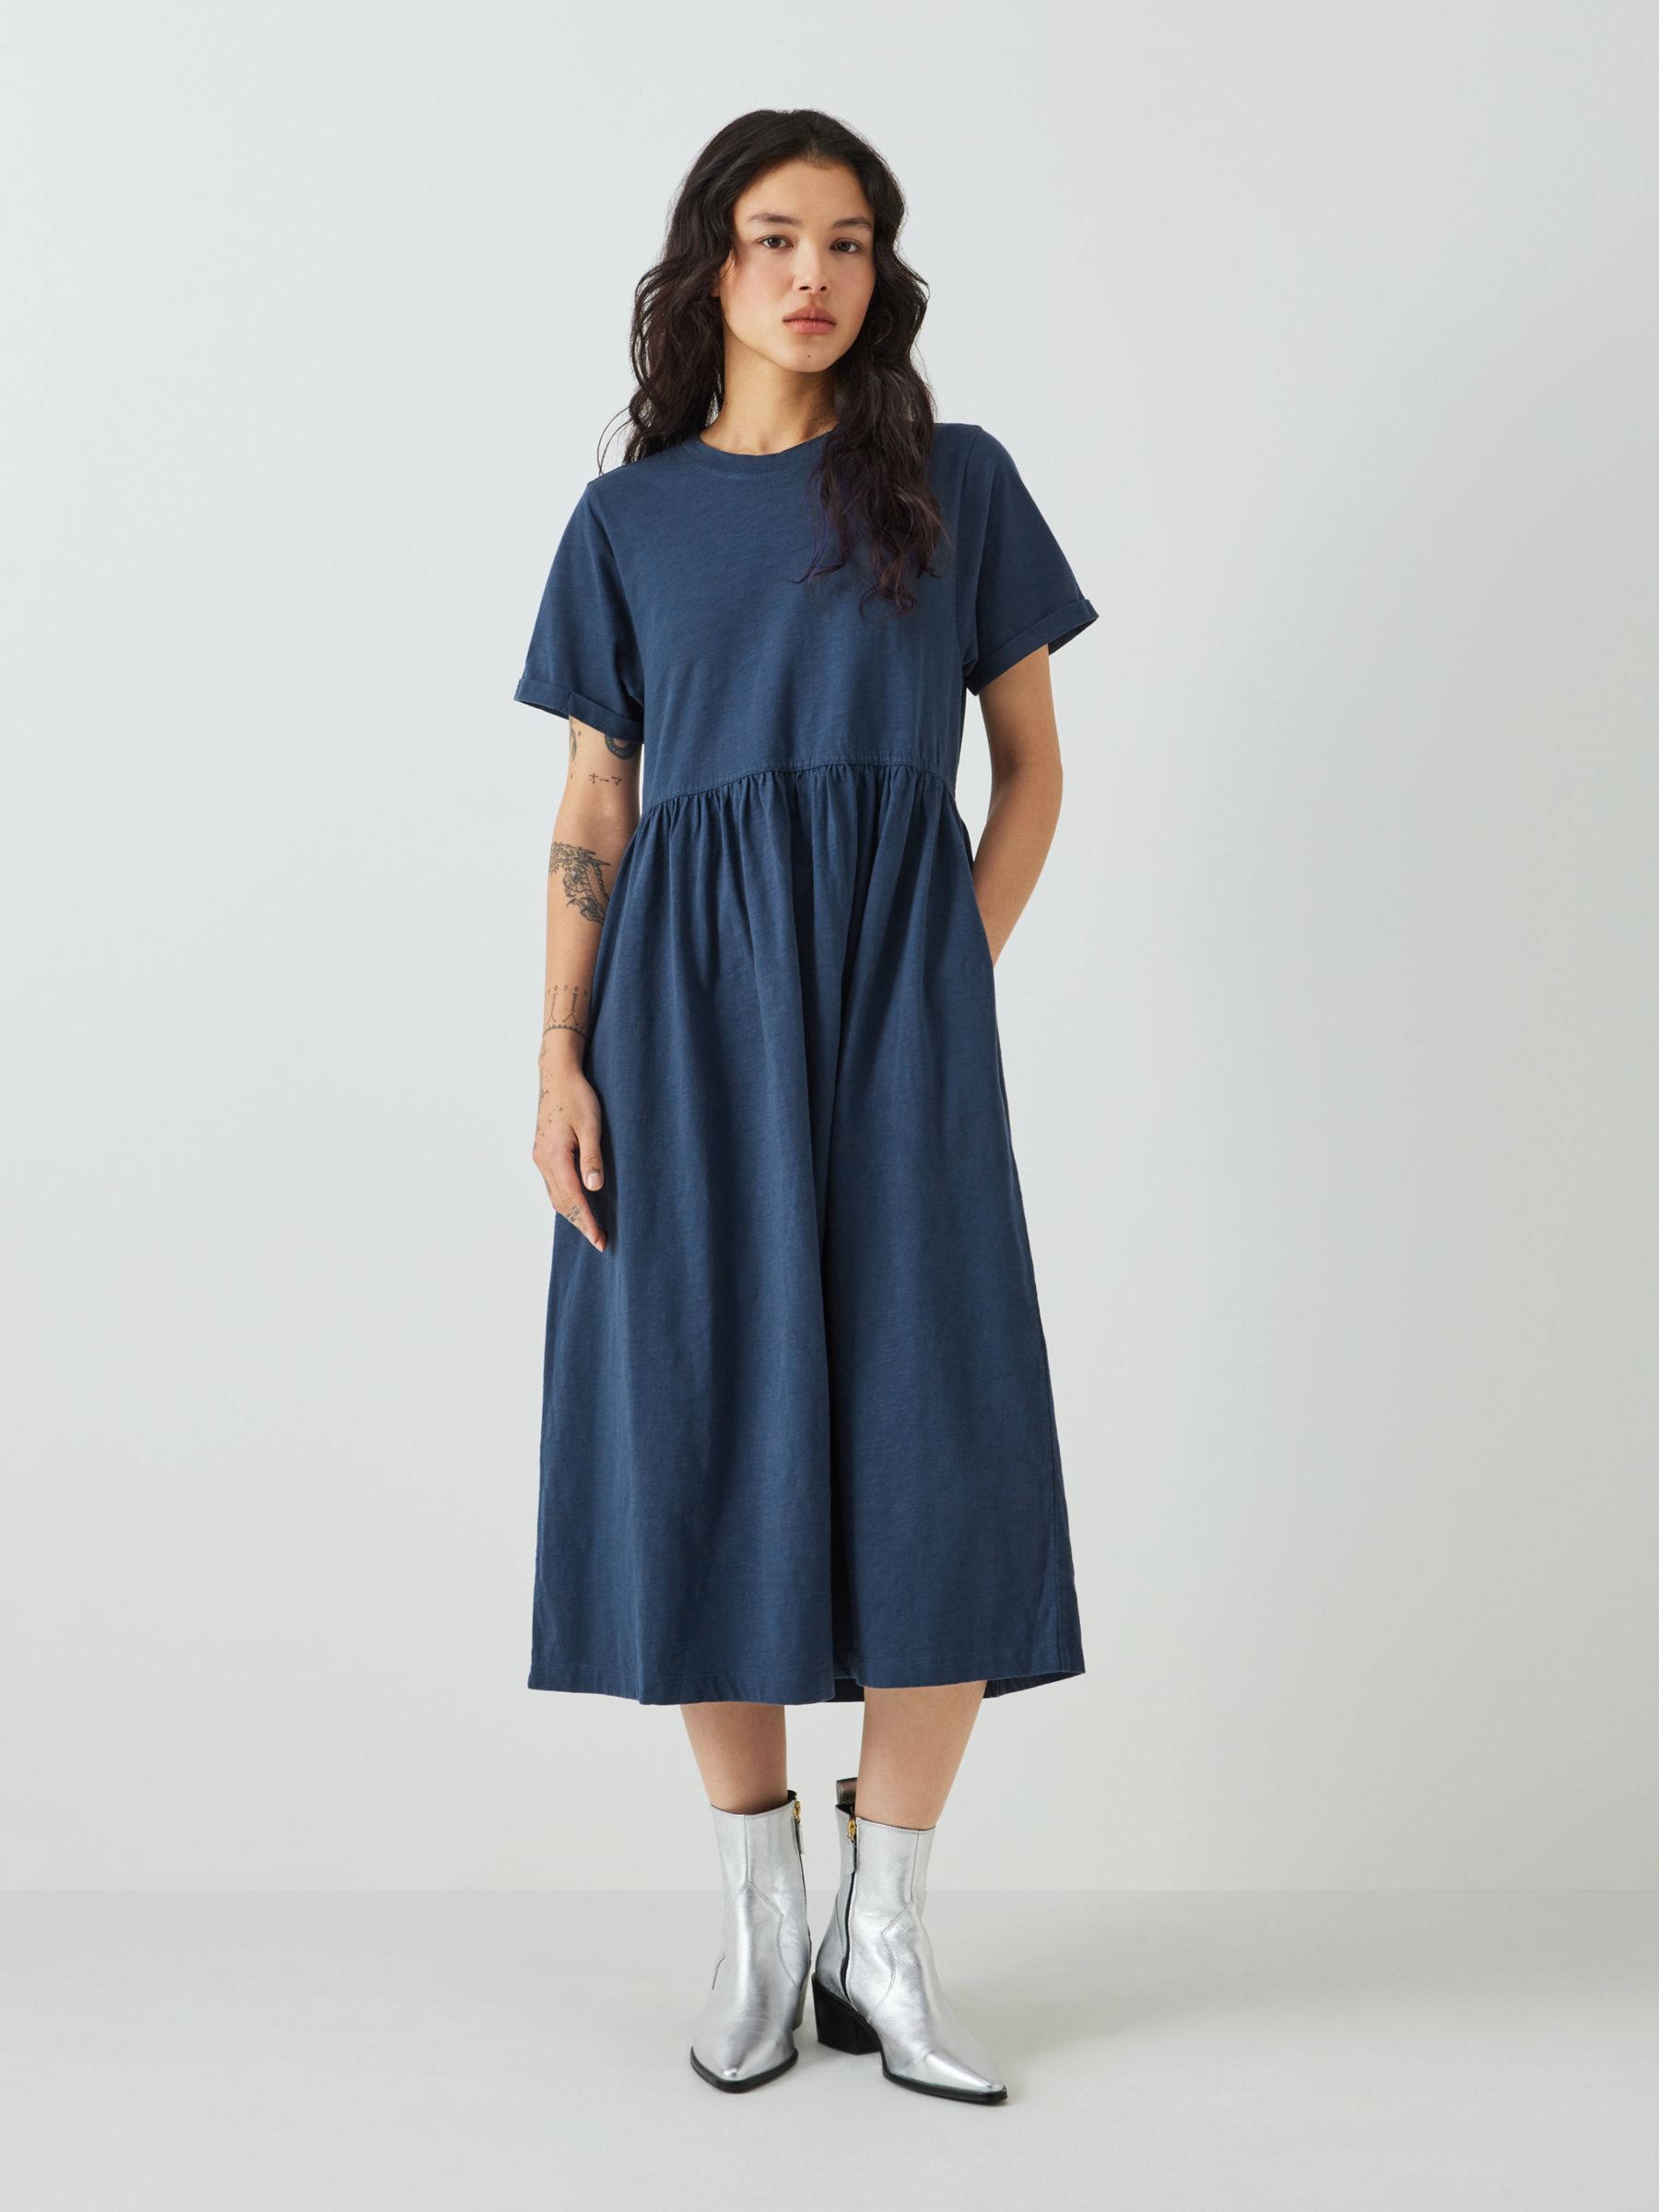 John Lewis & Partners Women's Clothing On Sale Up To 90% Off Retail